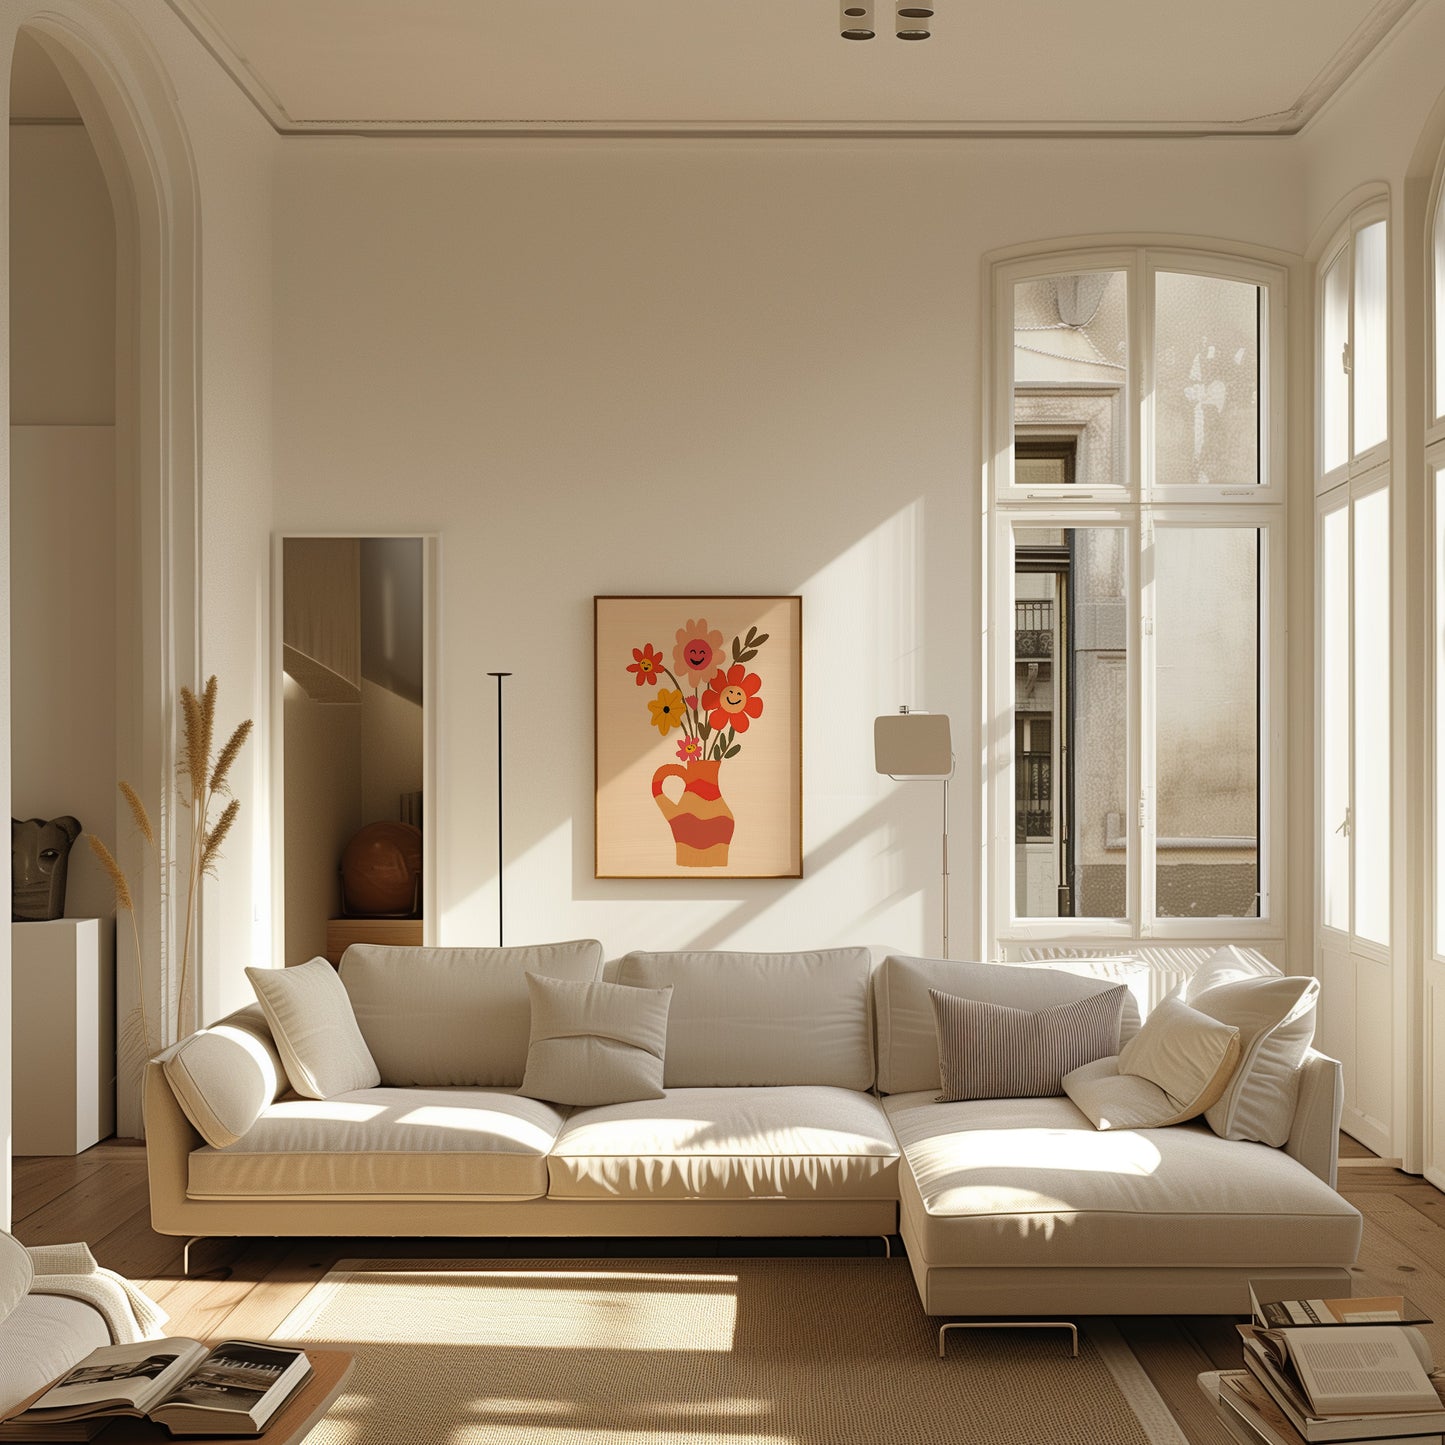 A bright, modern living room with a large white sofa and a floral painting on the wall.